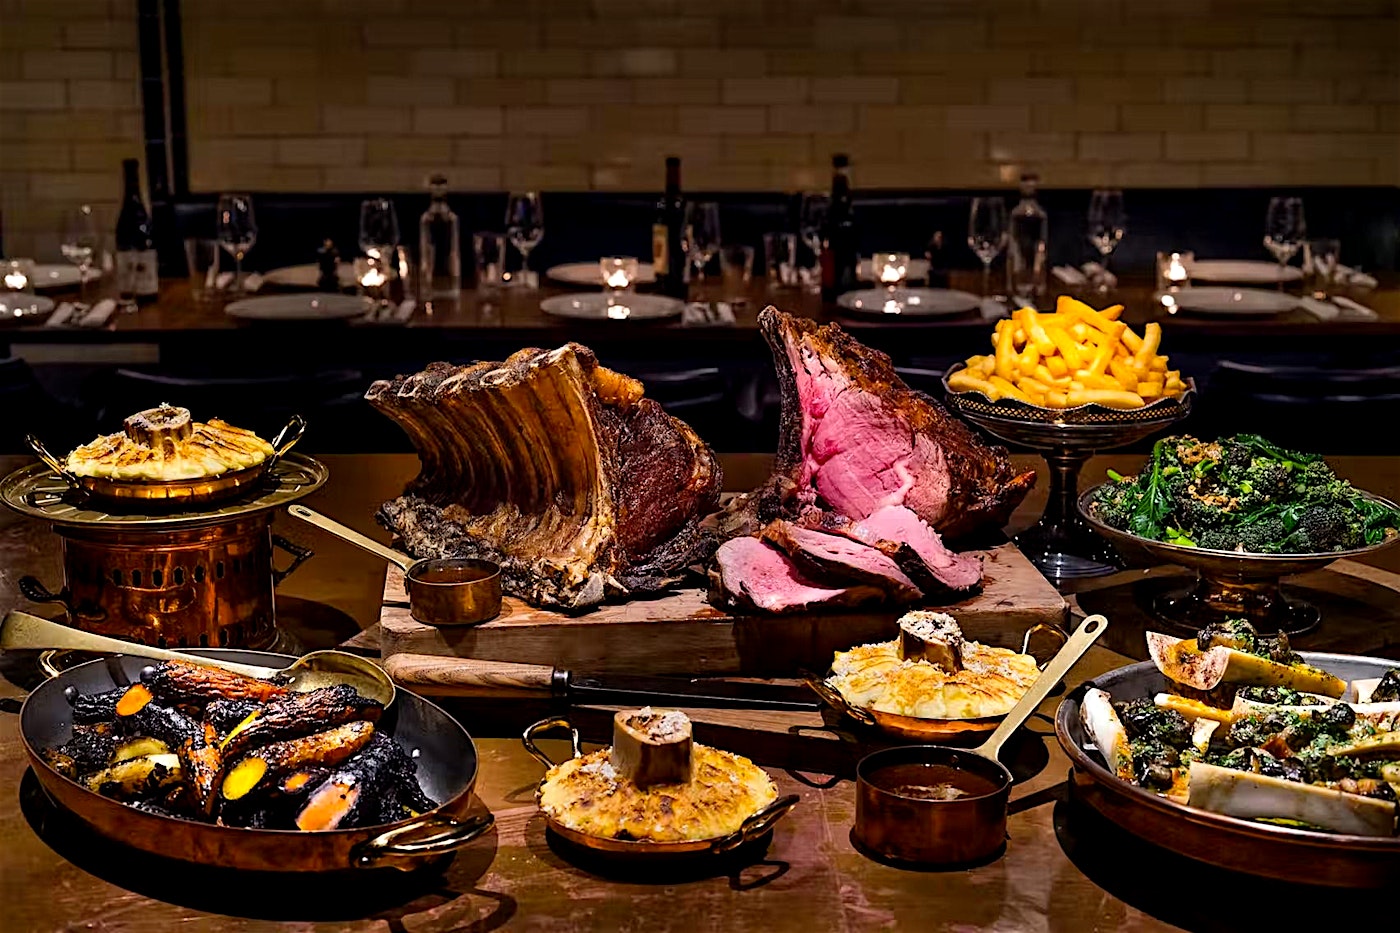 The Beef Feast, a sharing feast at the Cooks Room, a private dining room at the steak restaurant Hawksmoor Borough